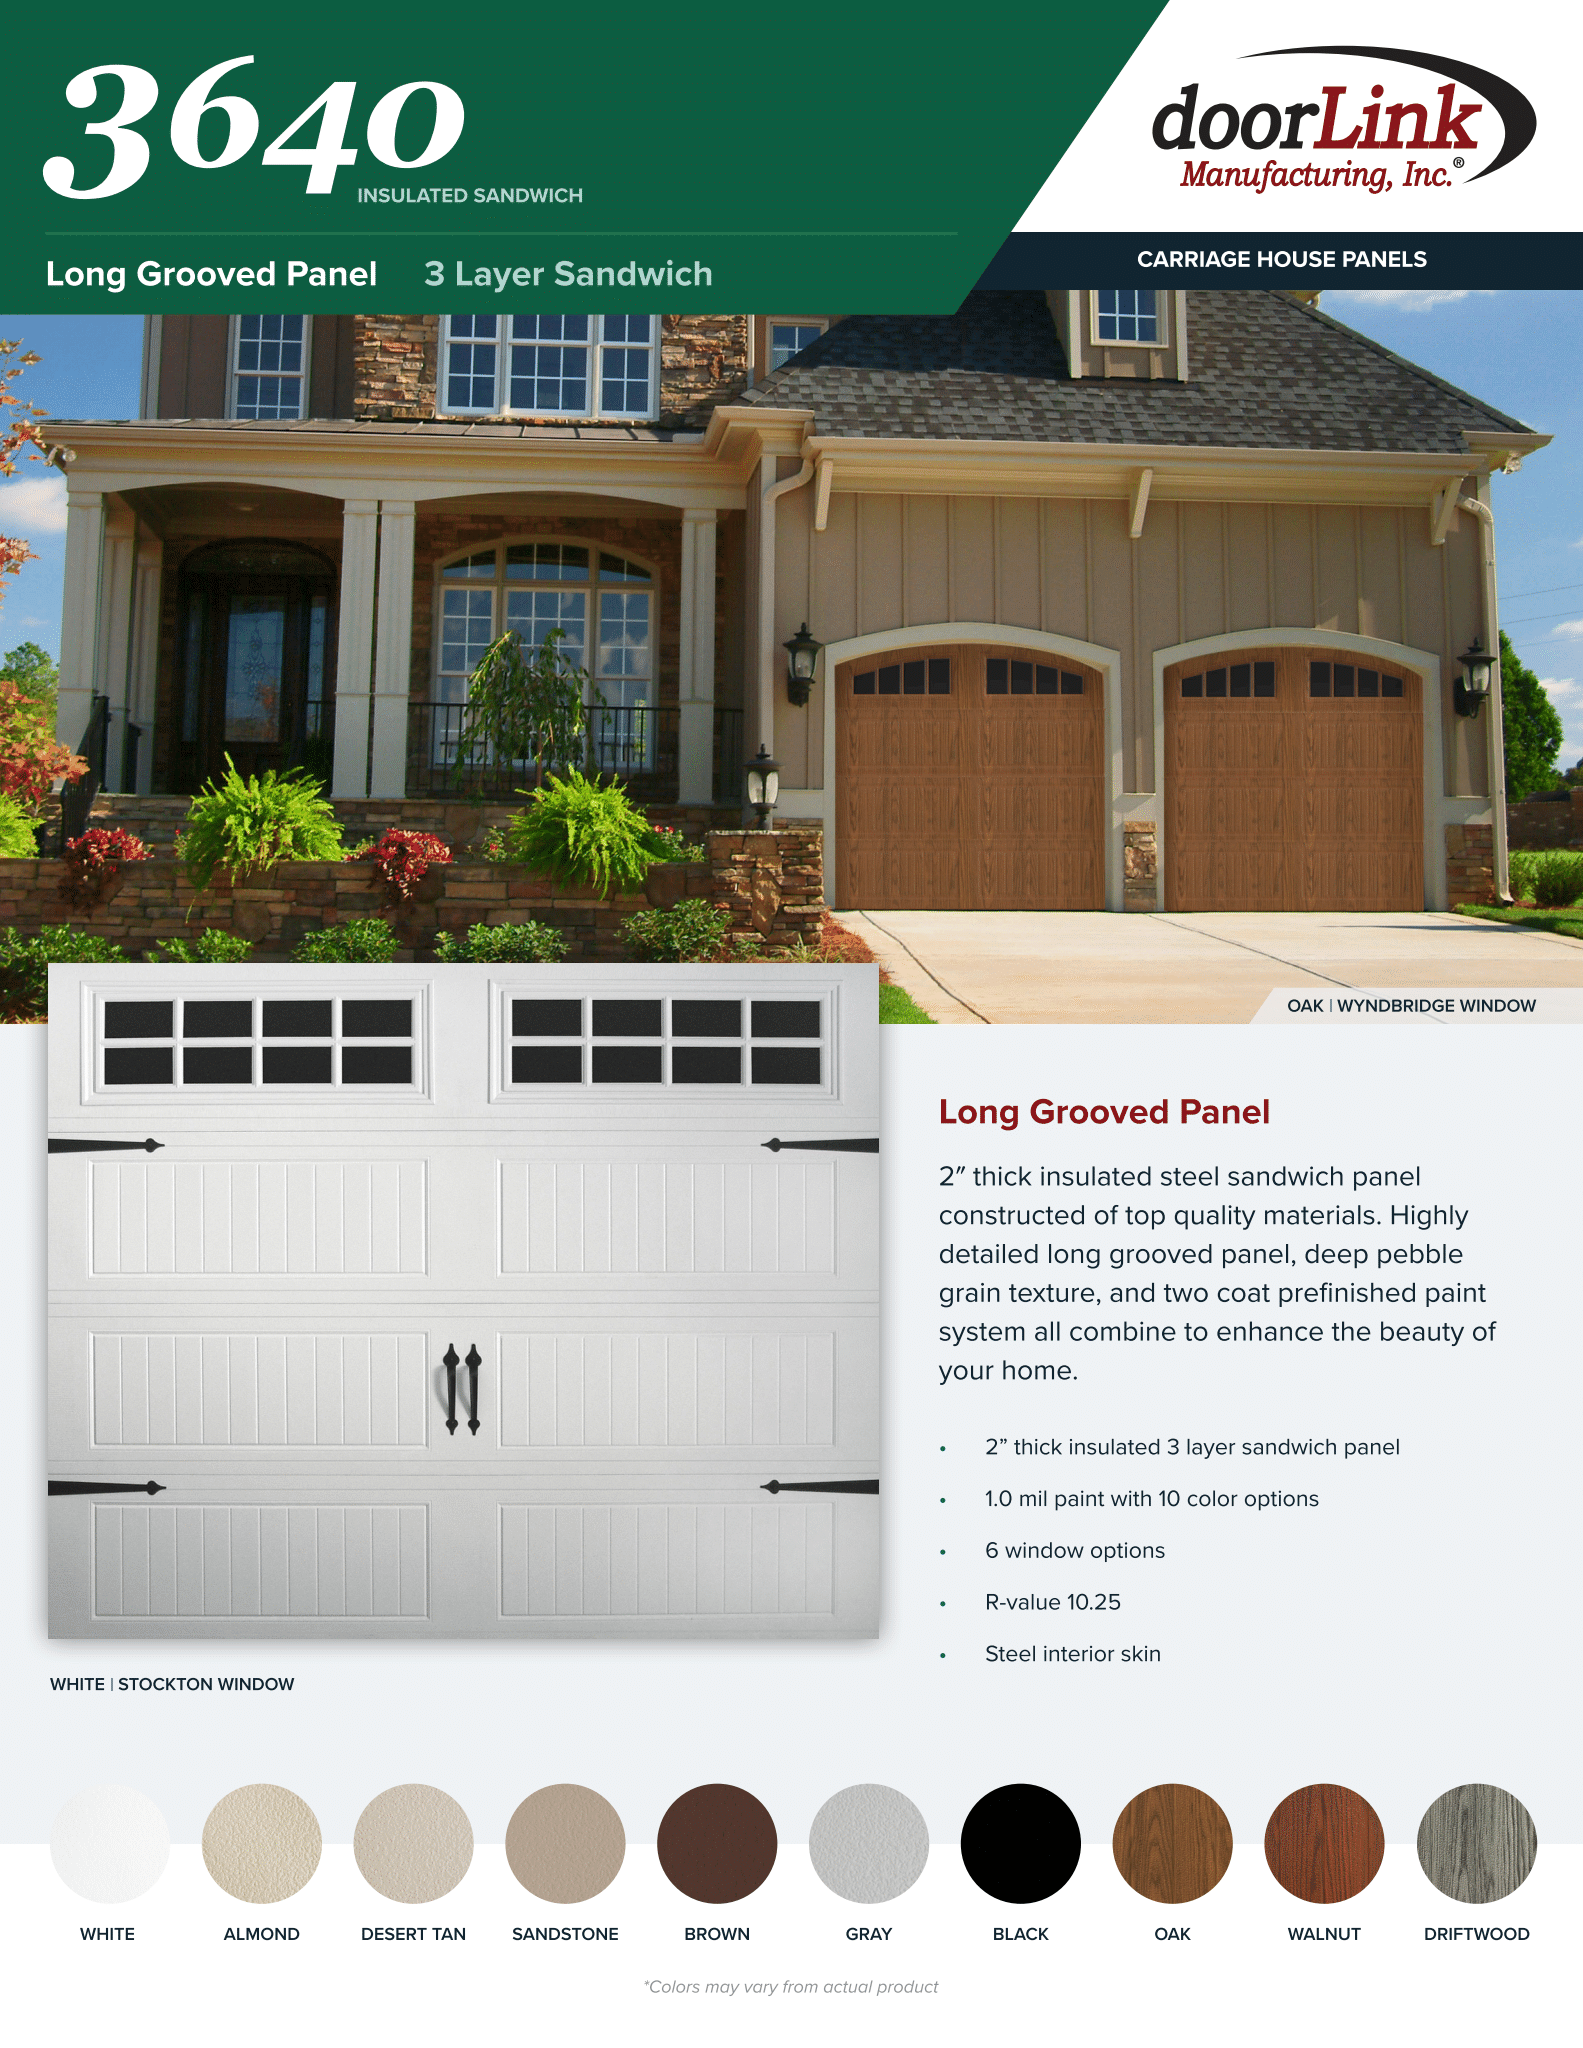 3 Layers Long Grooved Panel Page 1 — St. Charles, MO — Garage Door Gurus